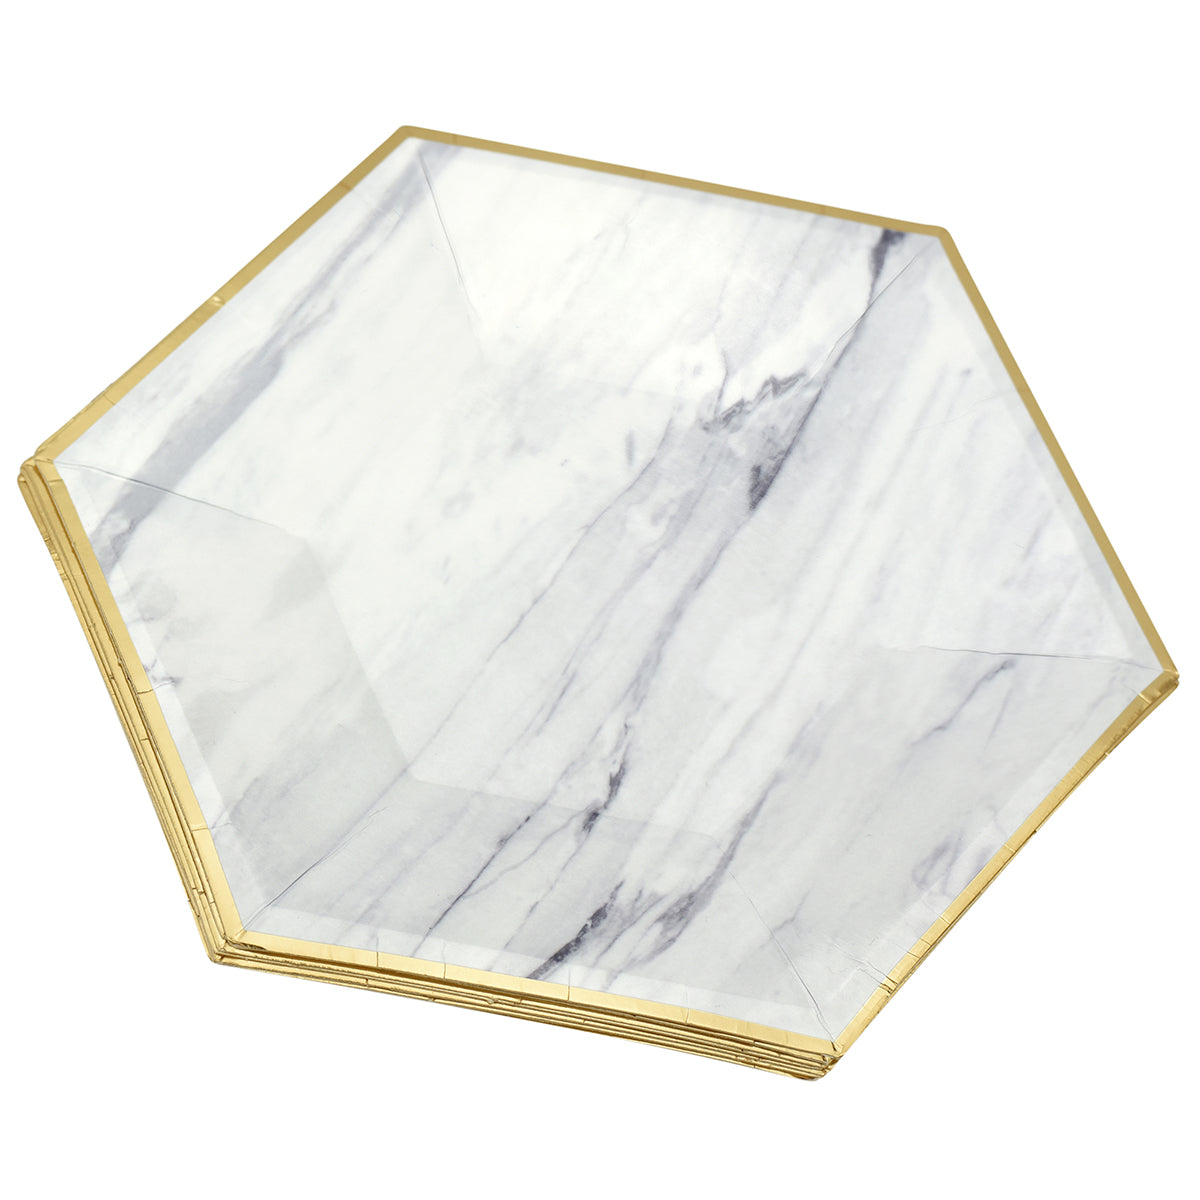 A hexagon paper plate with marble design